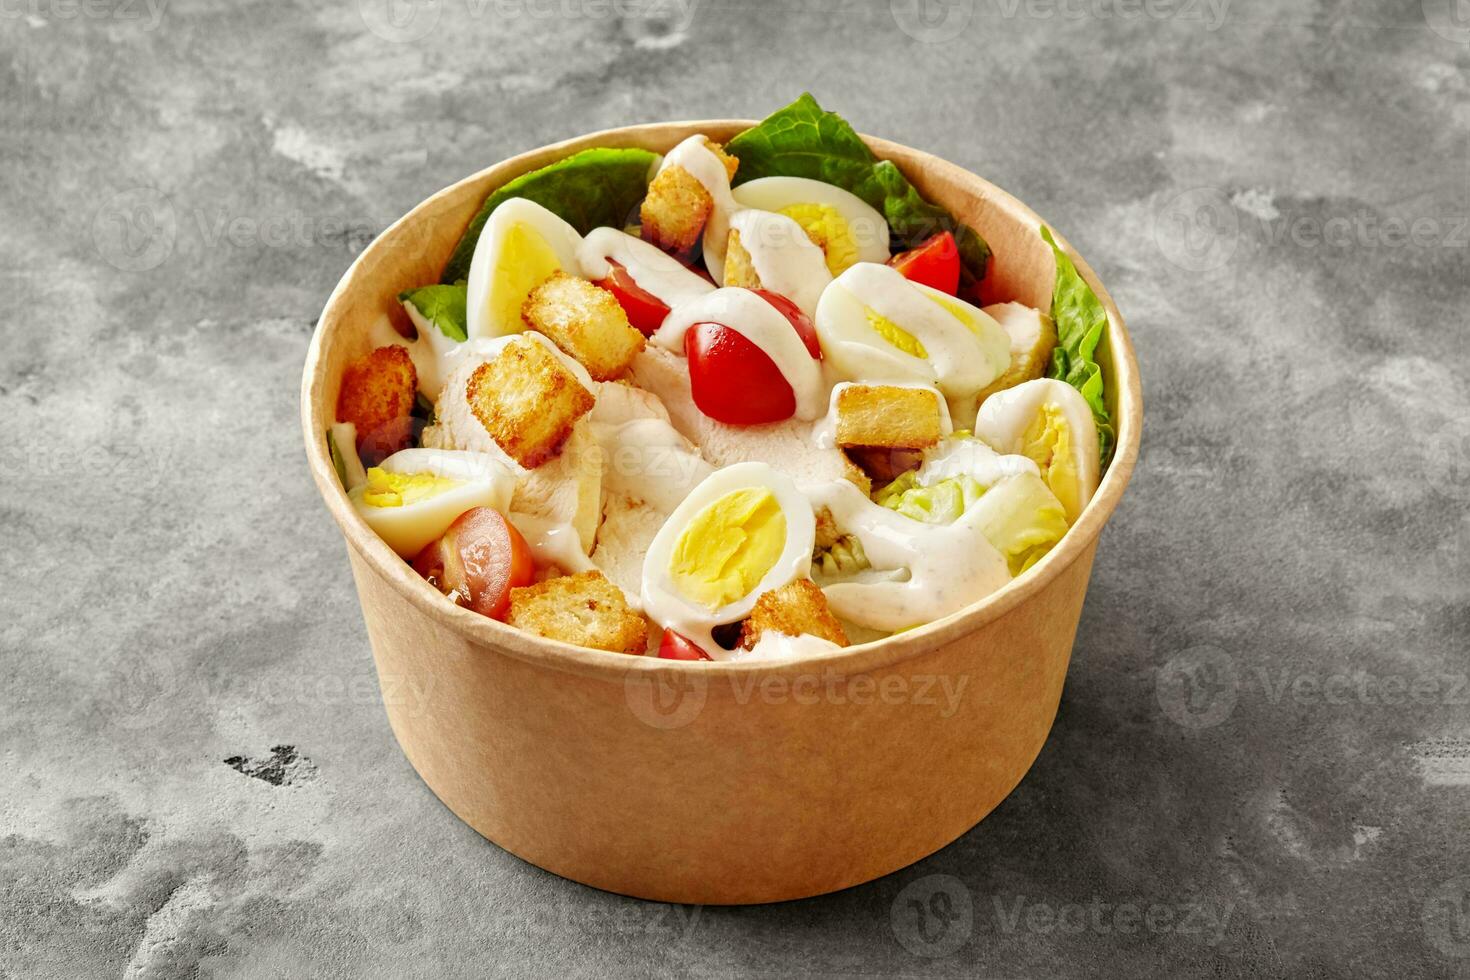 Paper bowl of Caesar salad with romaine lettuce, tomatoes, quail egg, croutons, chicken fillet and sauce photo